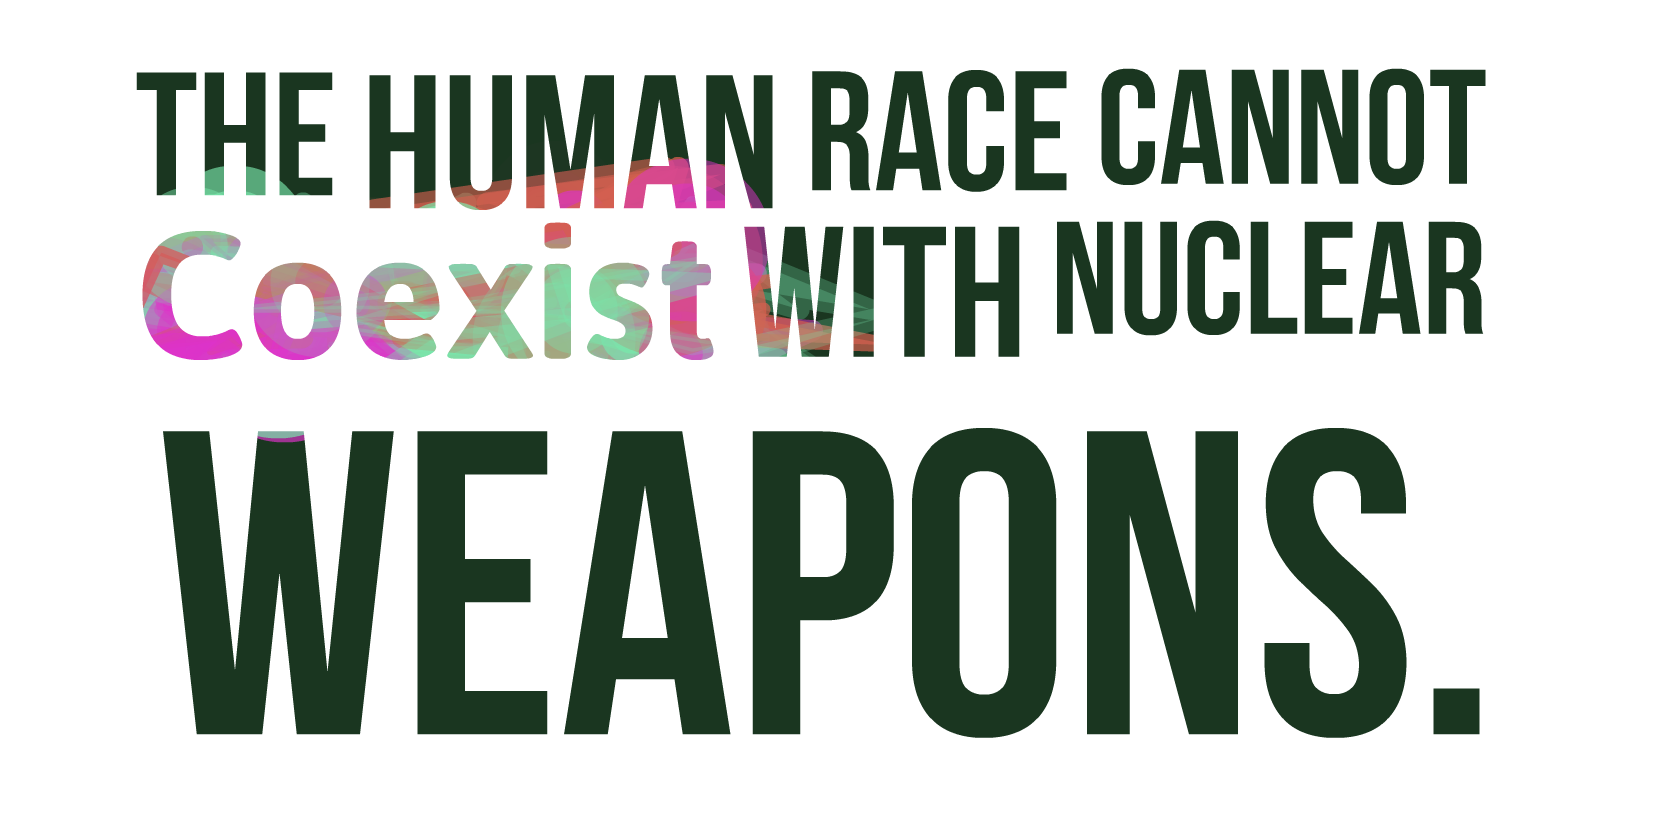 Against nuclear weapons essay